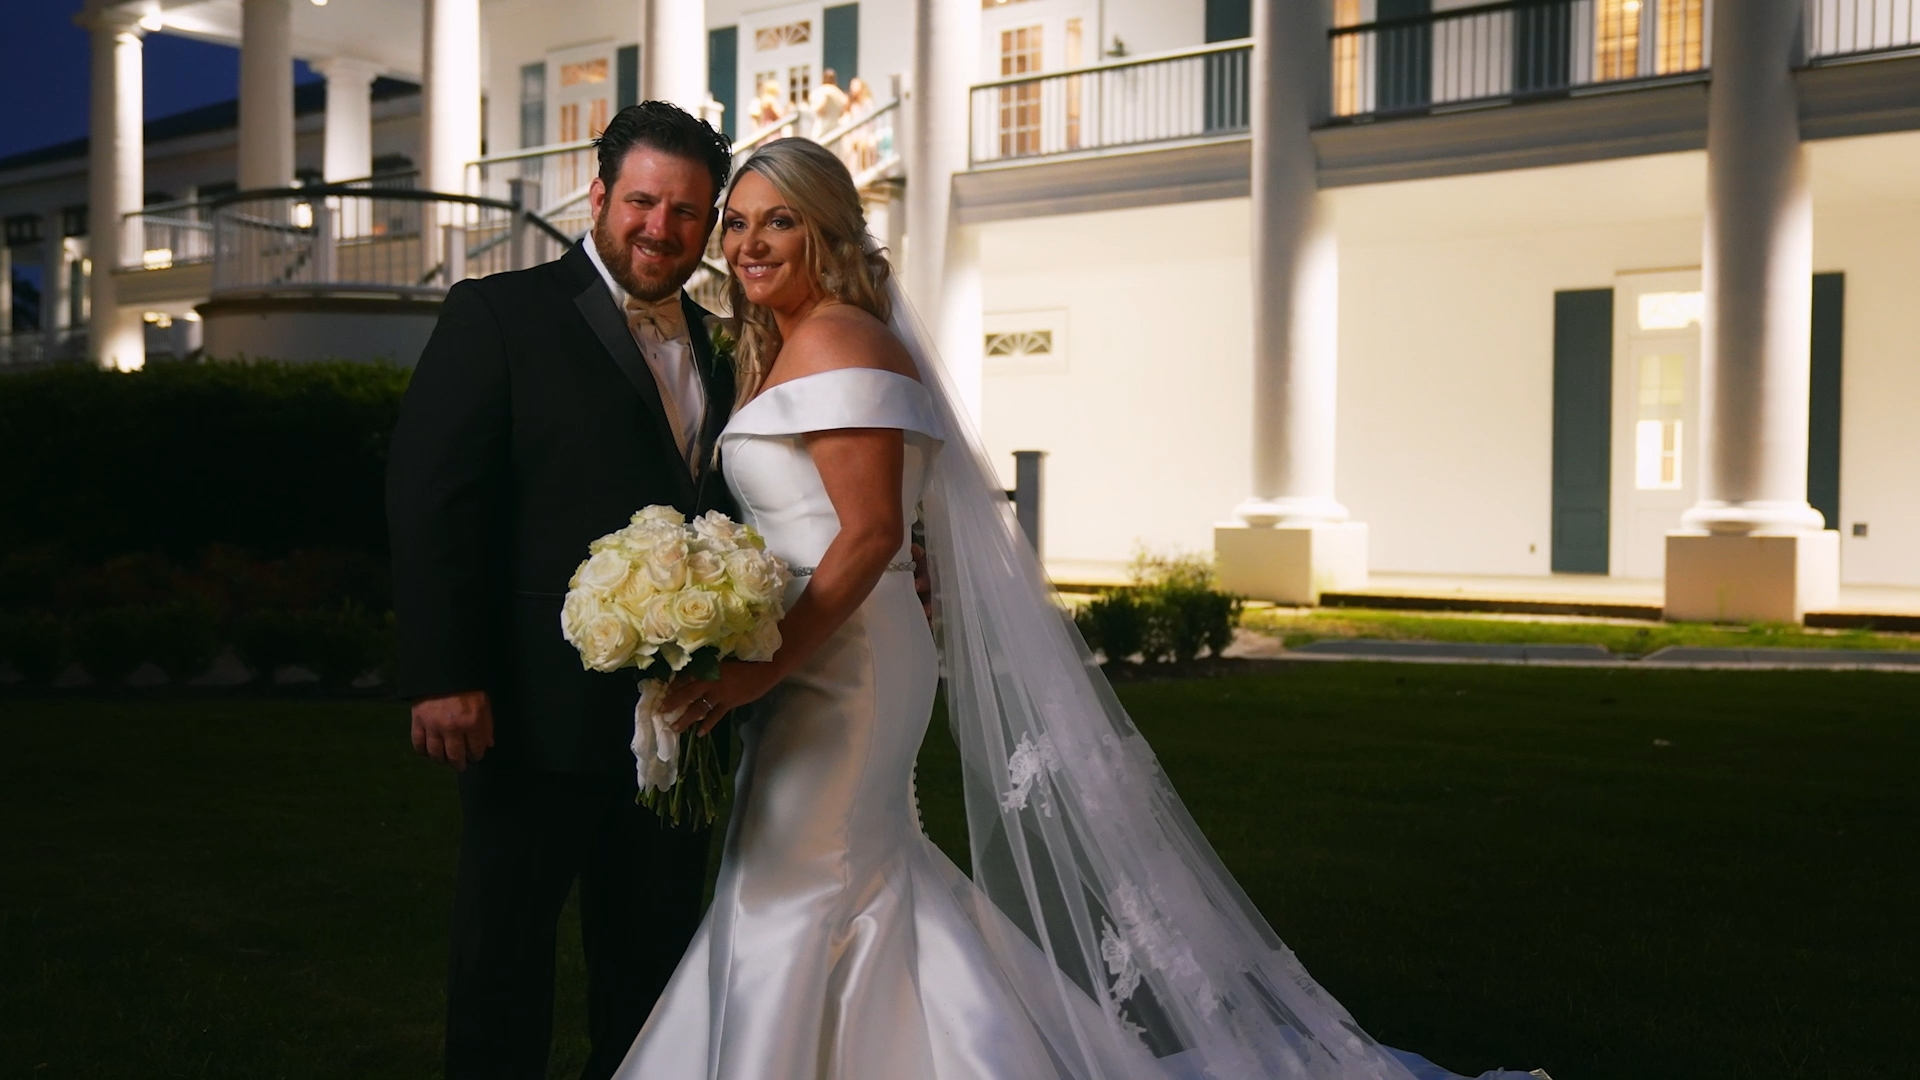 Client - Brittany DeSalvo & Sid Fremin | Highlight Film, Location - Country Club of Louisiana - Baton Rouge, LA, Date - April 24, 2021